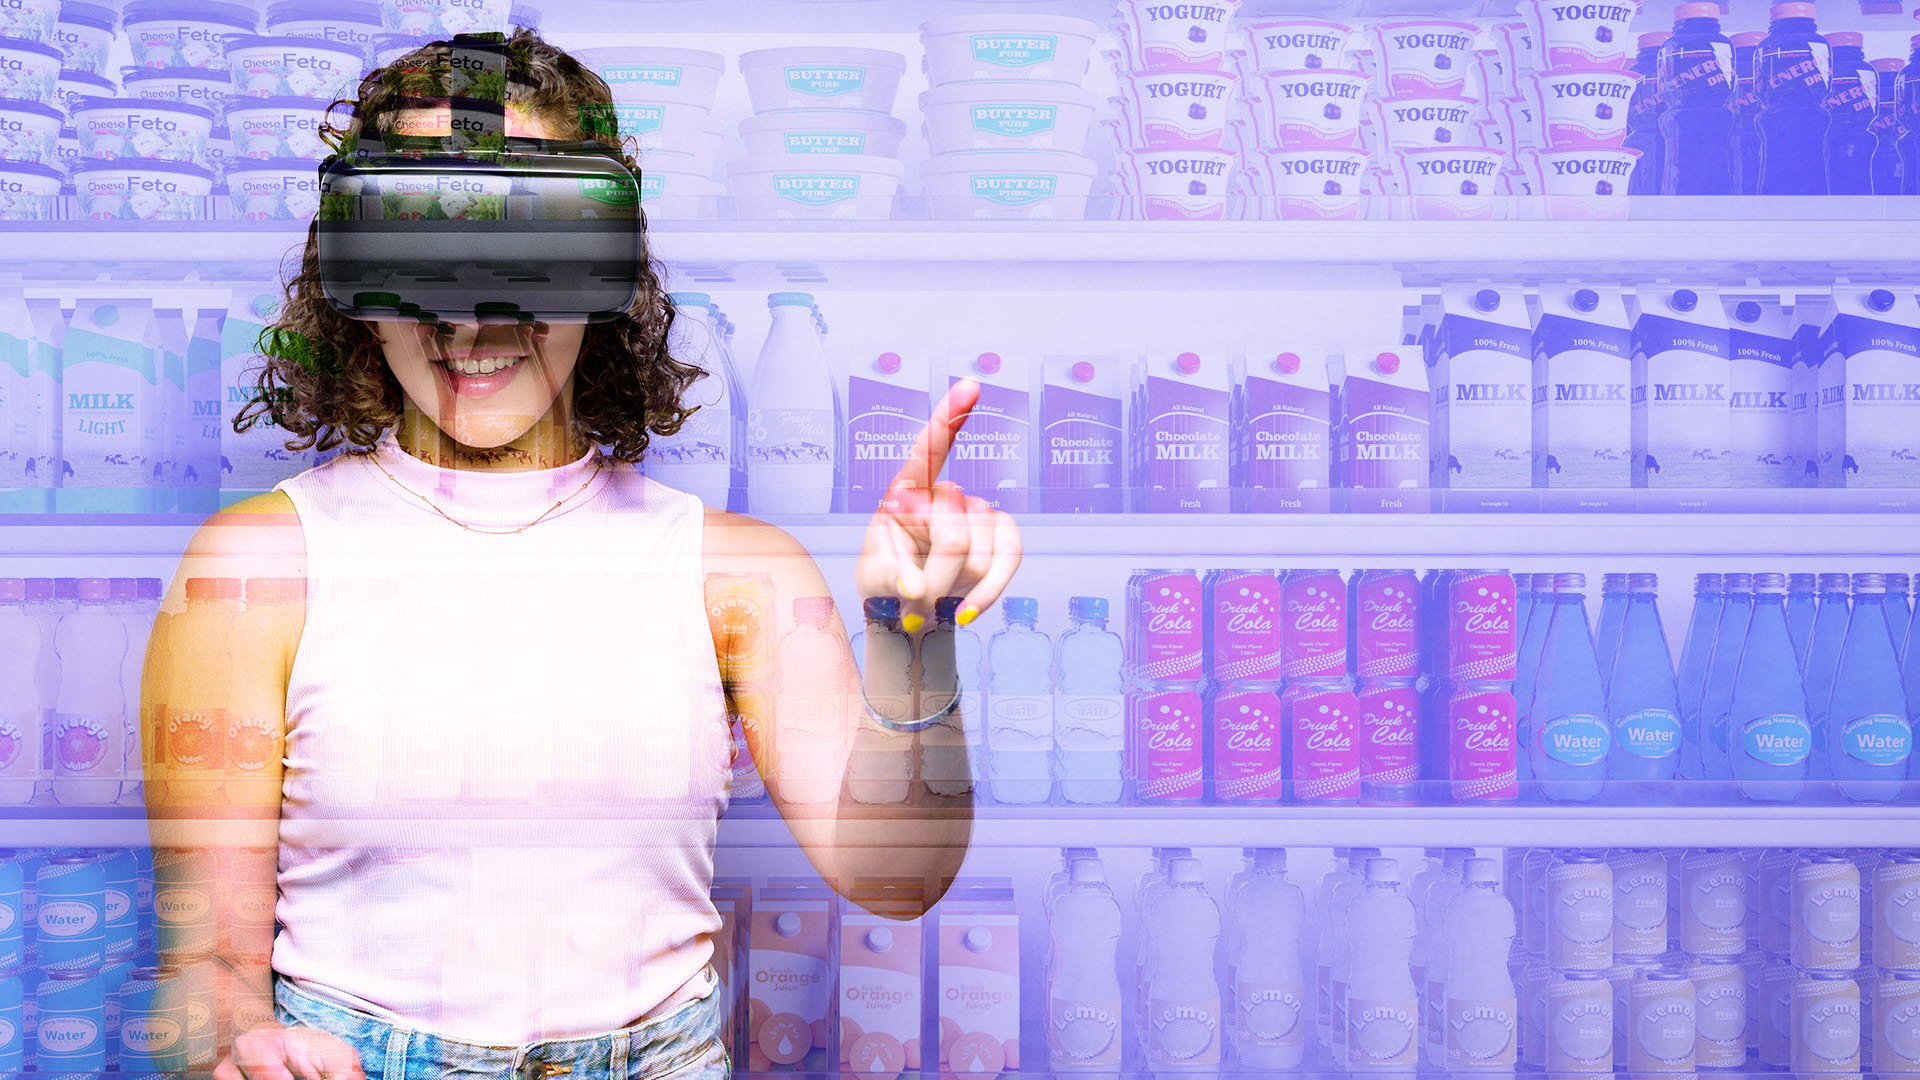 A woman wearing a VR headset is selecting groceries in the Metaverse.